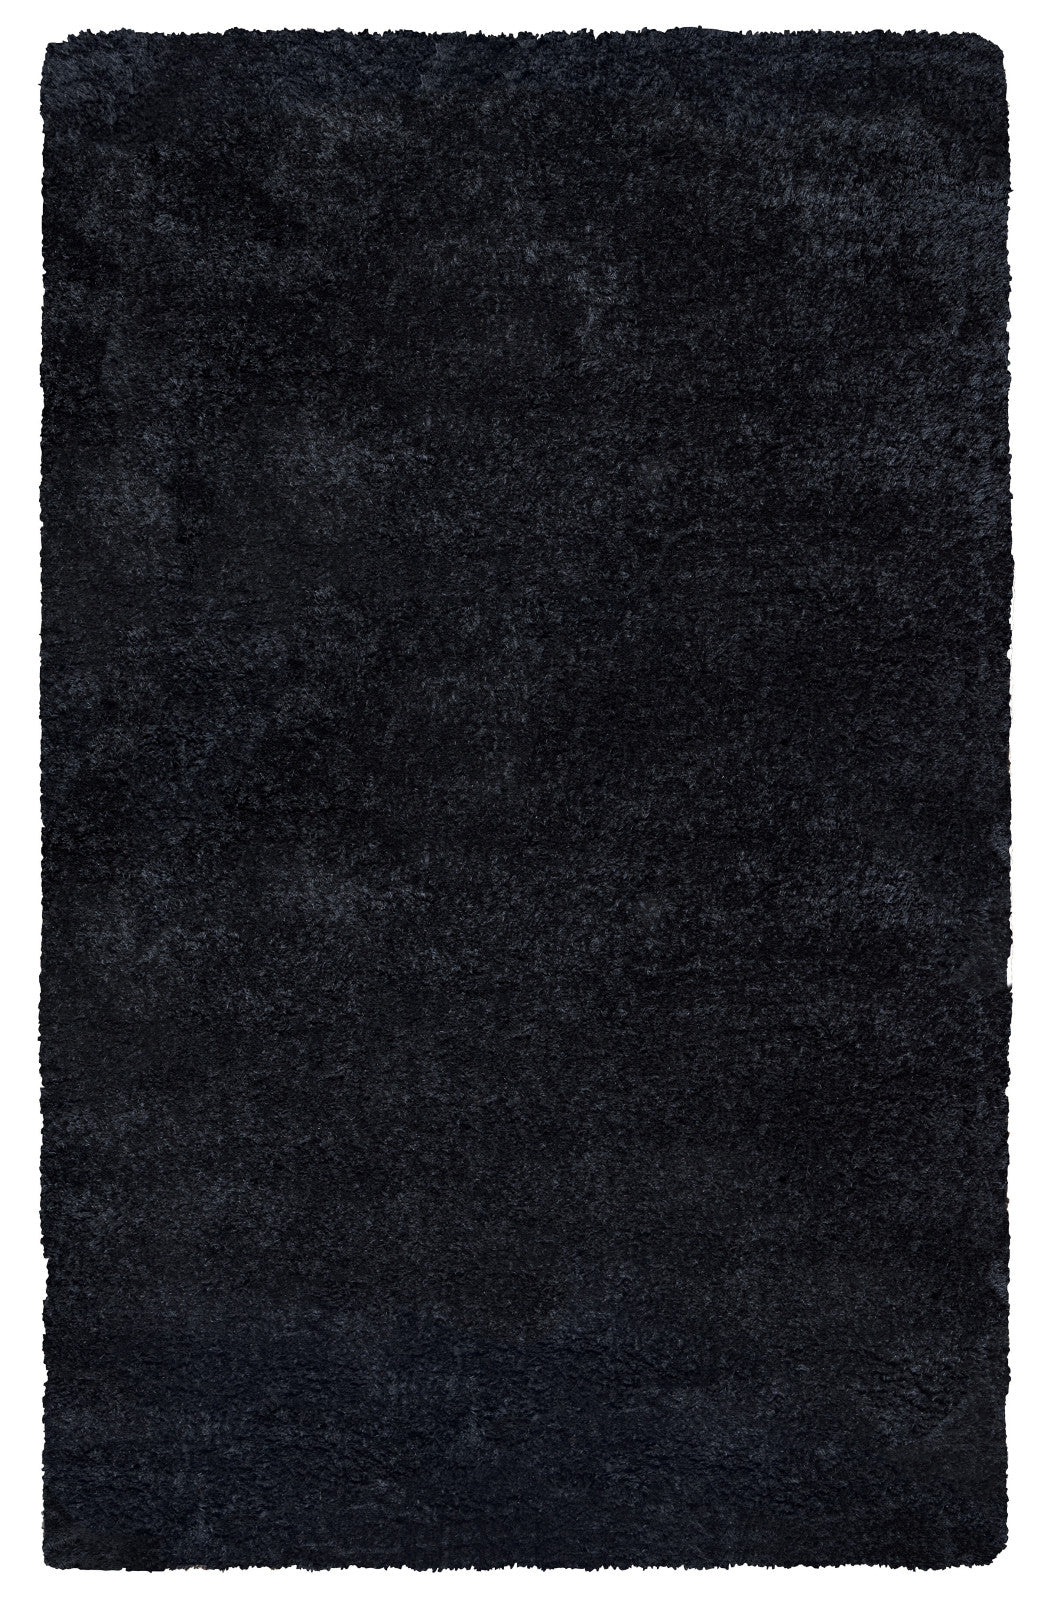 Rizzy Commons CO8419 Black Area Rug